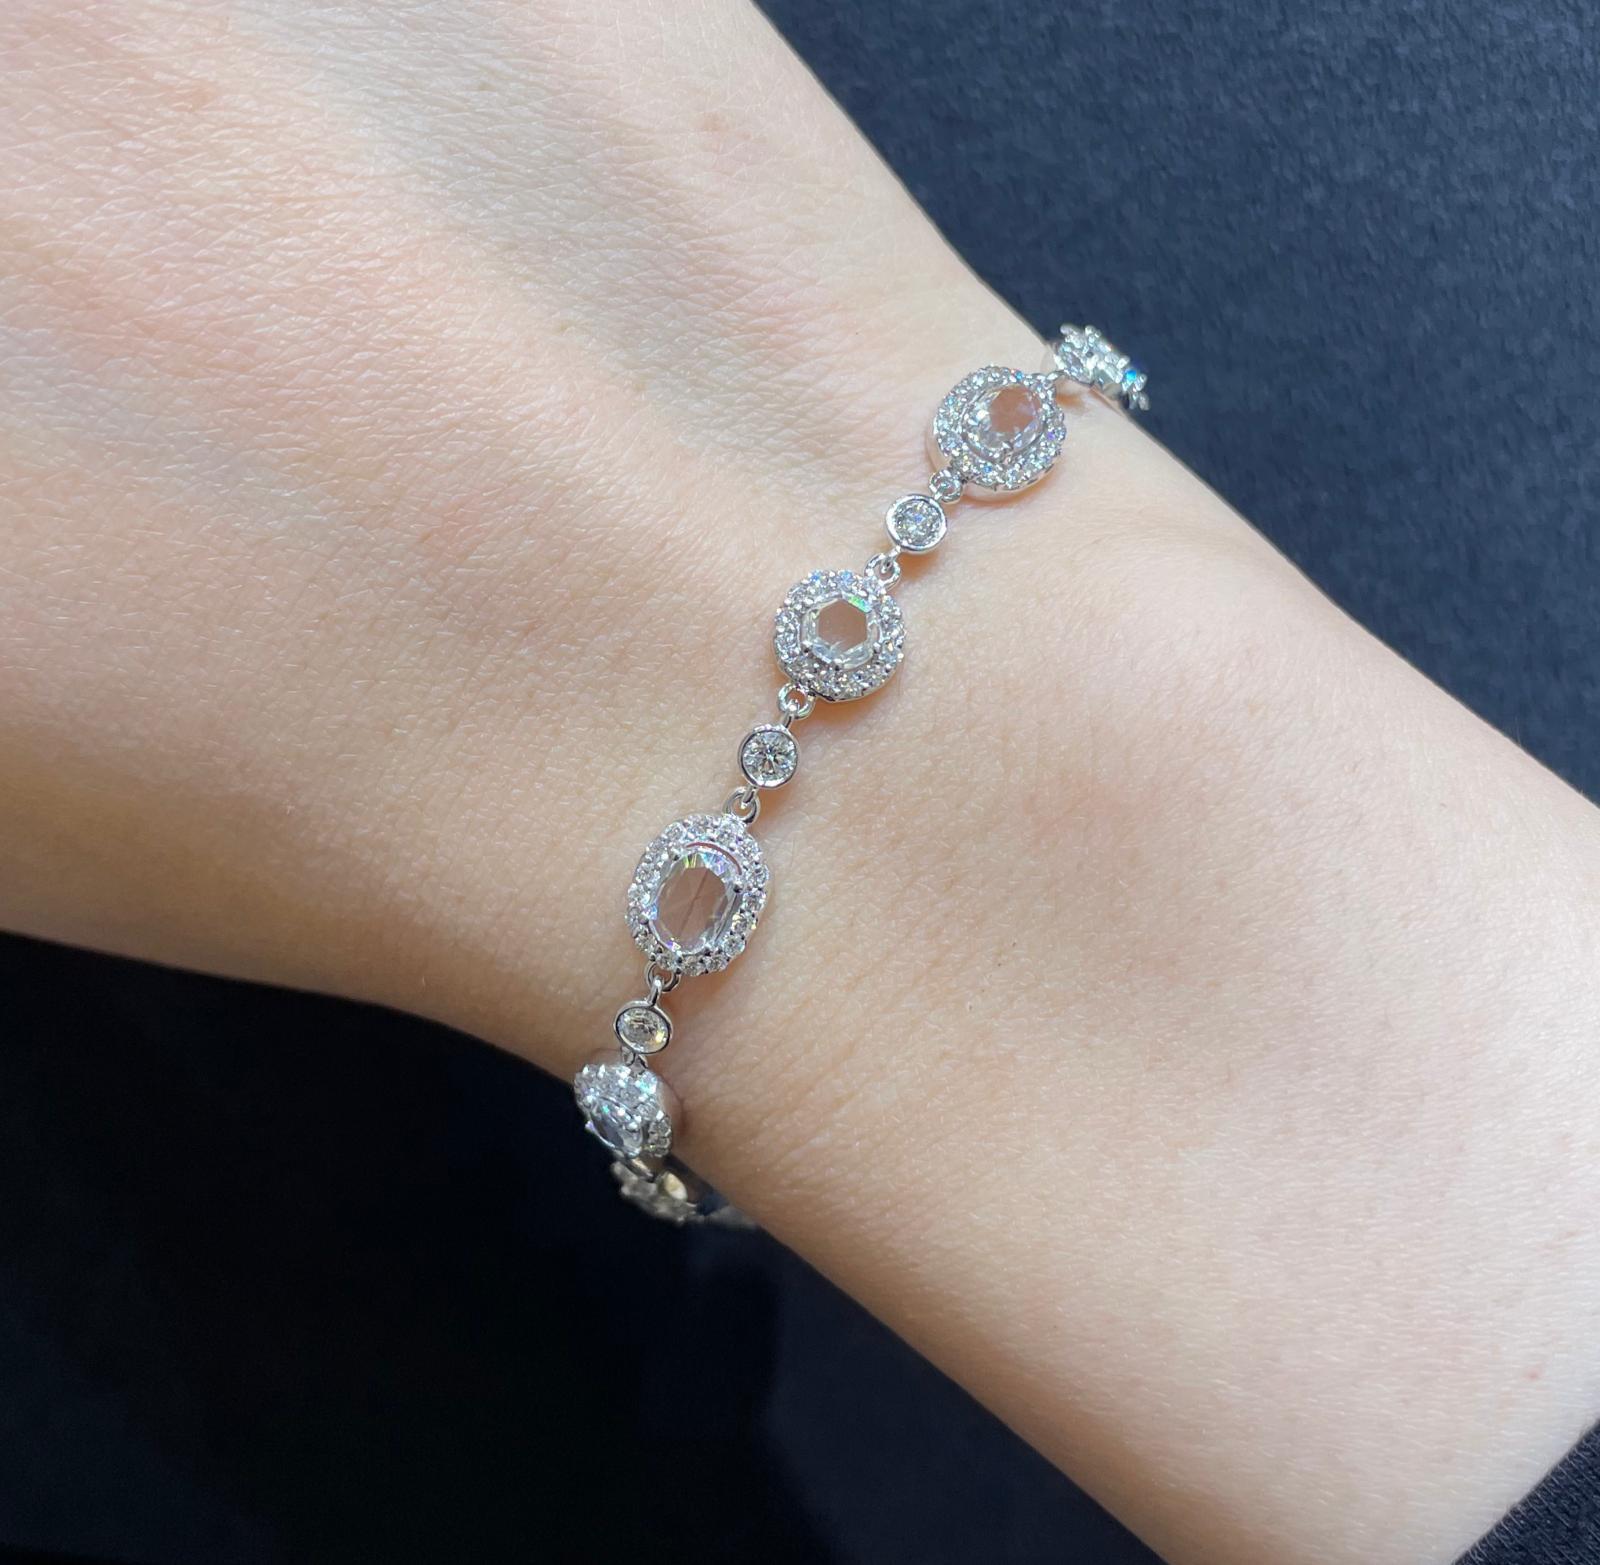 Every cluster in this bracelet is a wonder to behold, sparkling with iridescent whites, a look that can only be achieved by diamonds. A jaw-dropping 4.18 carat of Rosecut Diamonds are pave set within 18K white gold to make a truly exceptional piece